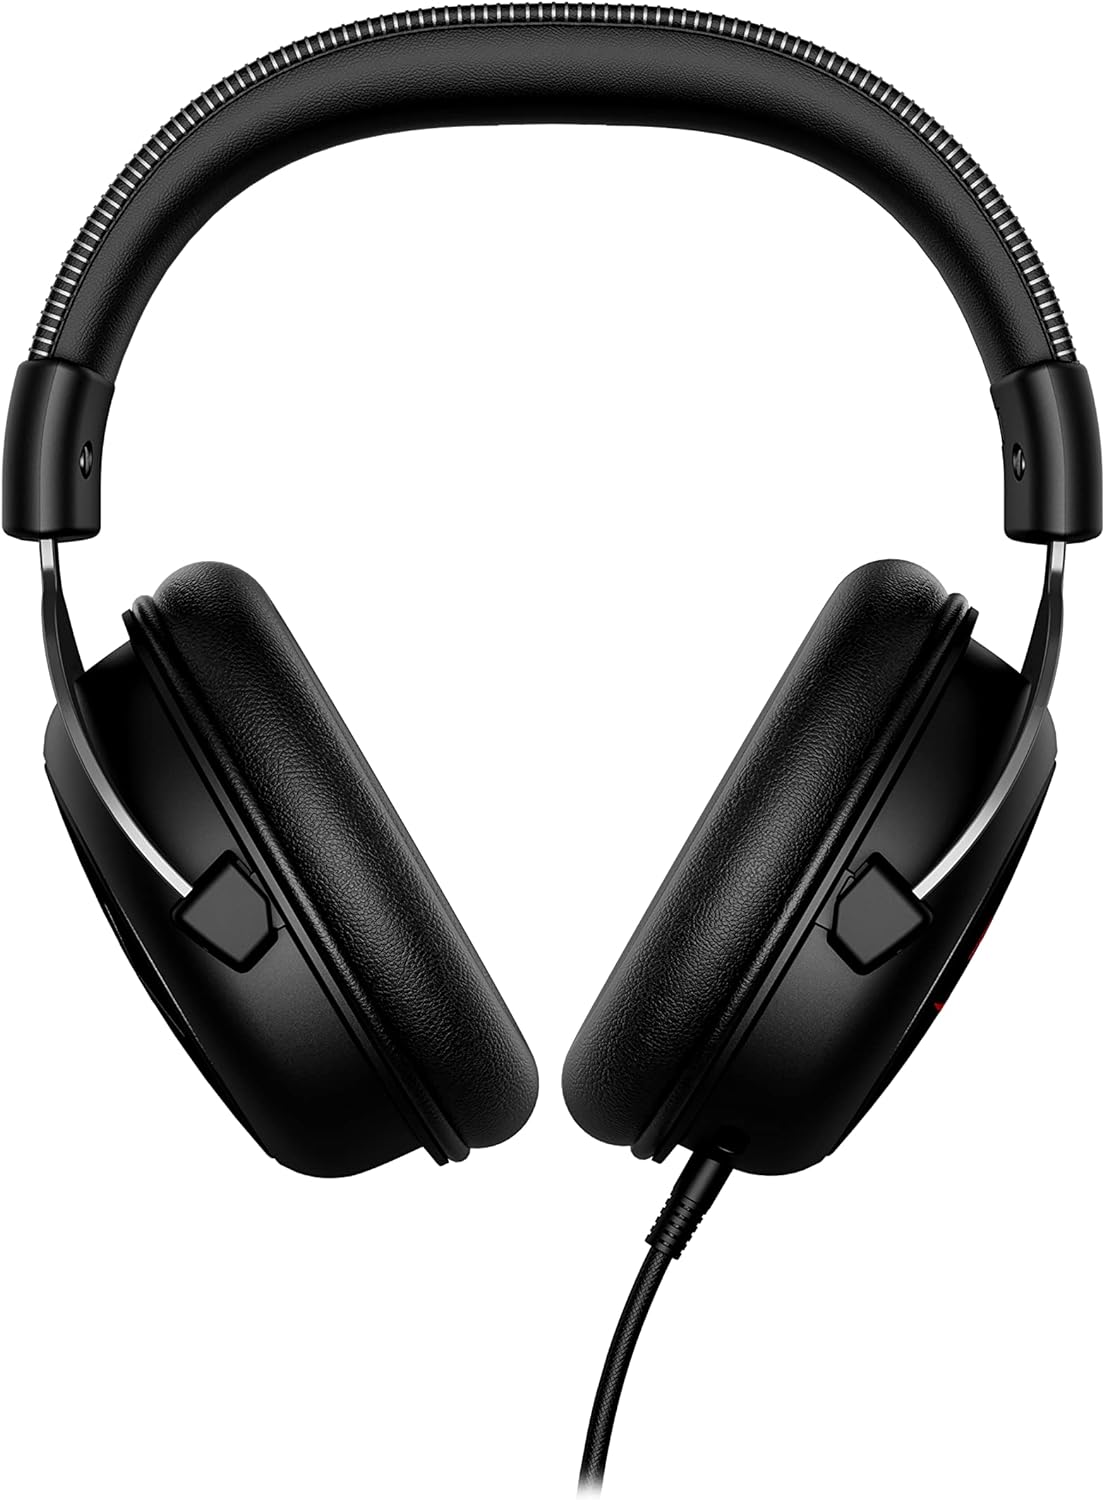 HyperX Cloud II Gaming Headset for PC & PS4 & Xbox One, Nintendo Switch, Black-Gunmetal, Wired